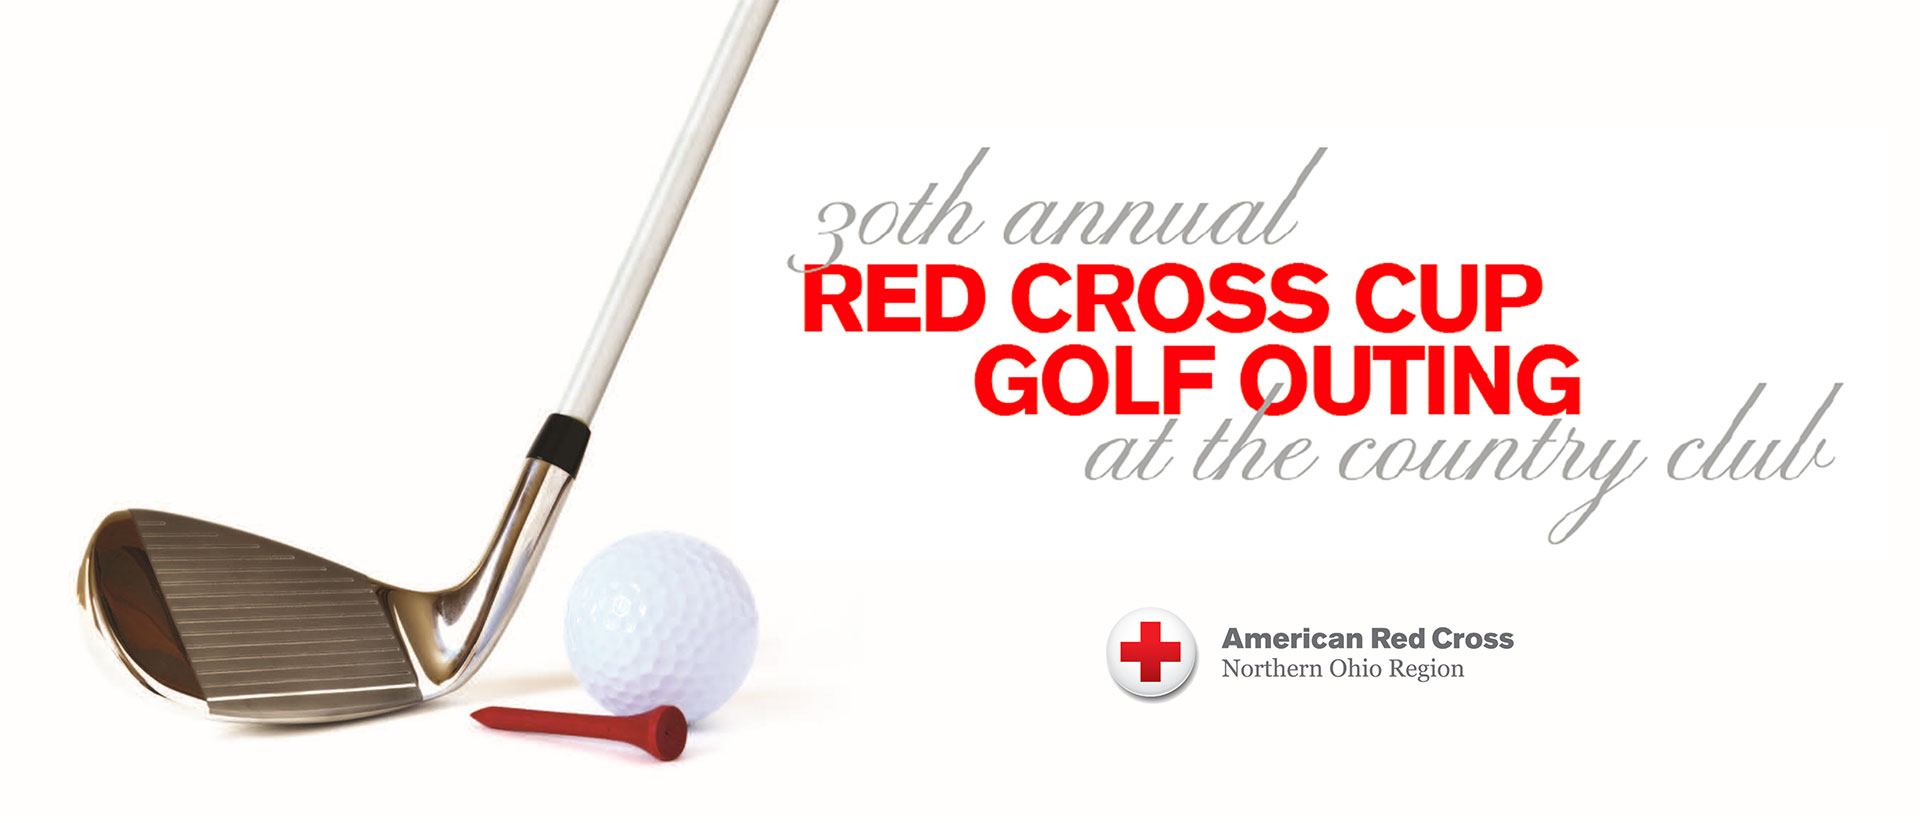 Red Cross Cup banner with golf club, golf ball and tee